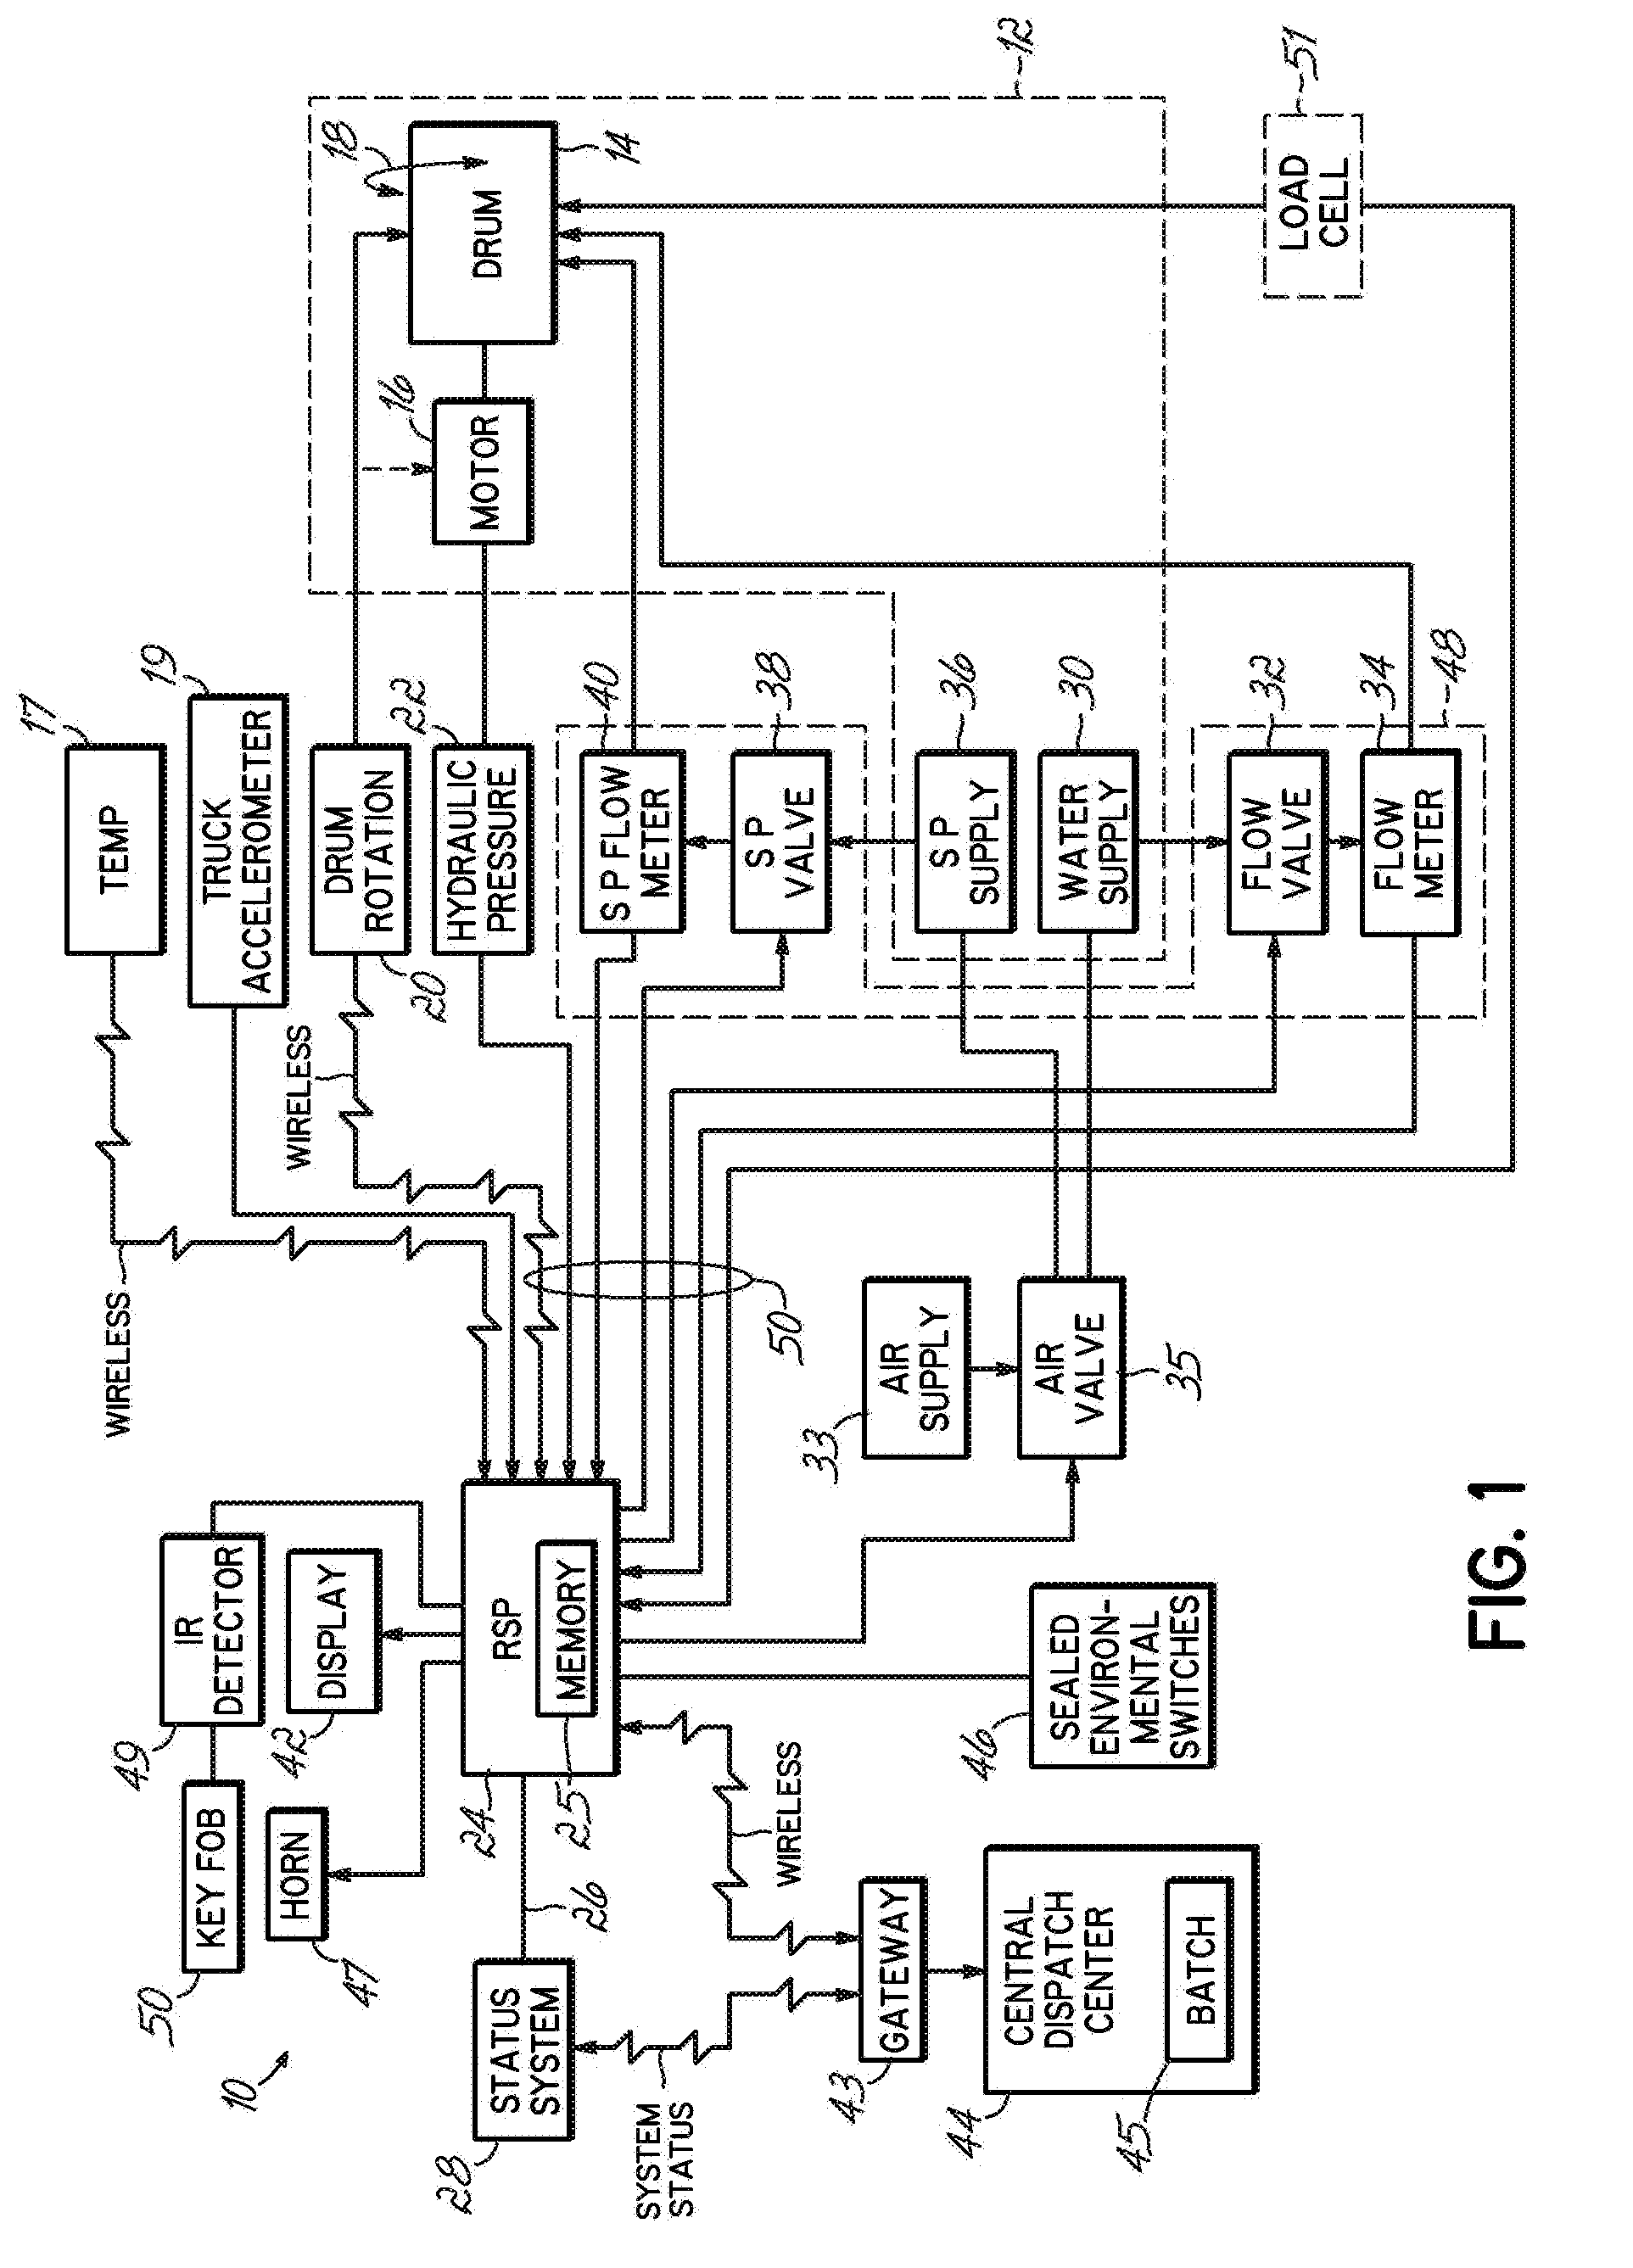 Method and System for Calculating and Reporting Slump in Delivery Vehicles